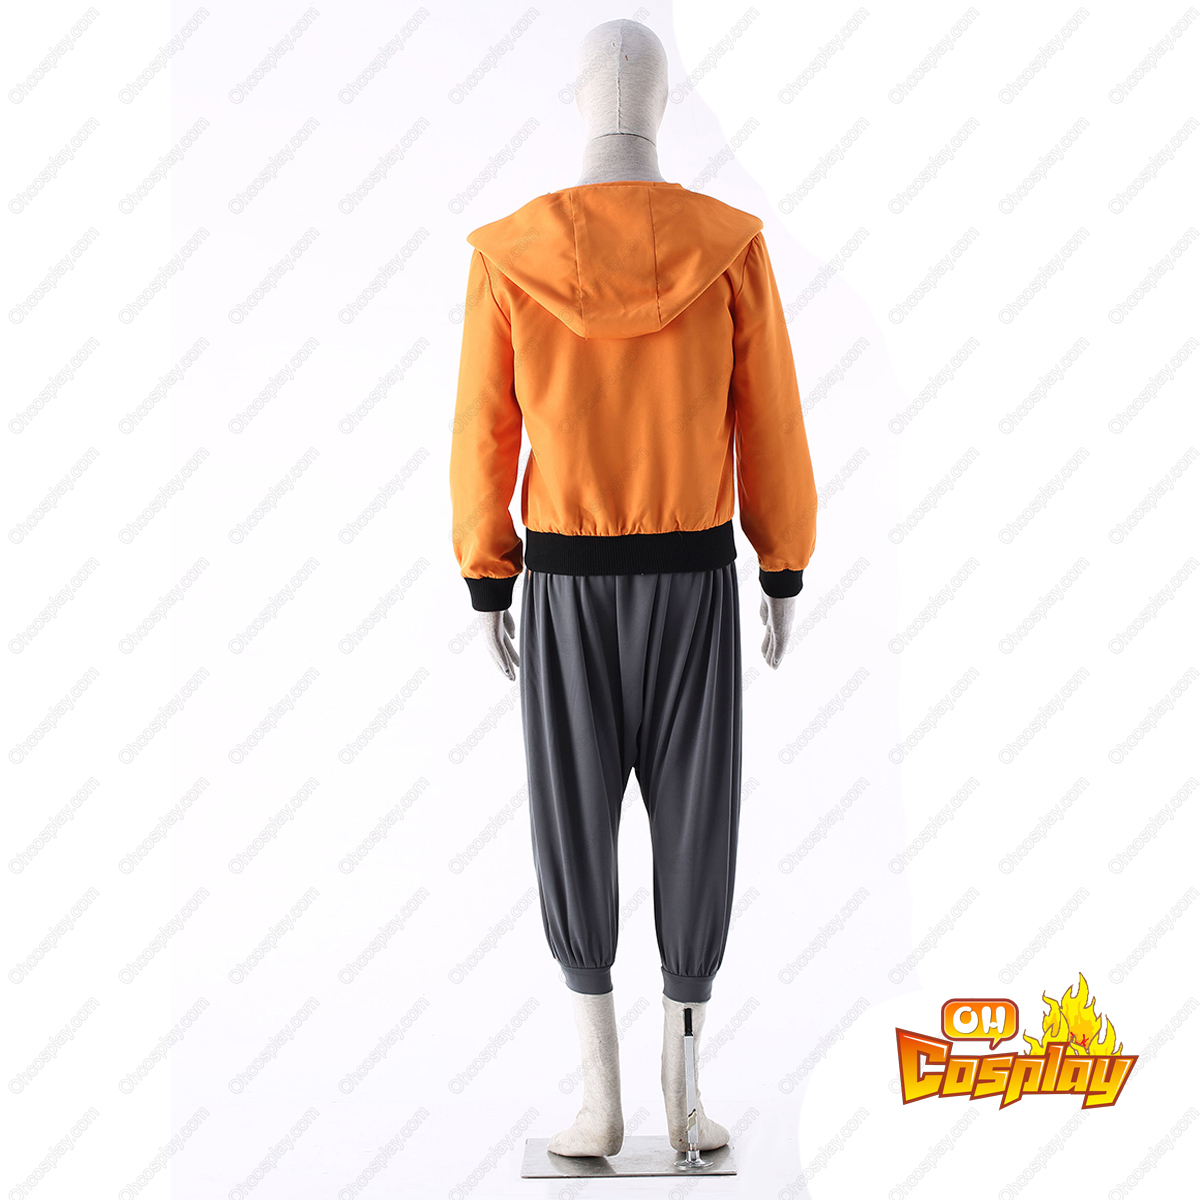 Naruto The Last Naruto 9TH Cosplay Costumes Deluxe Edition [C89]